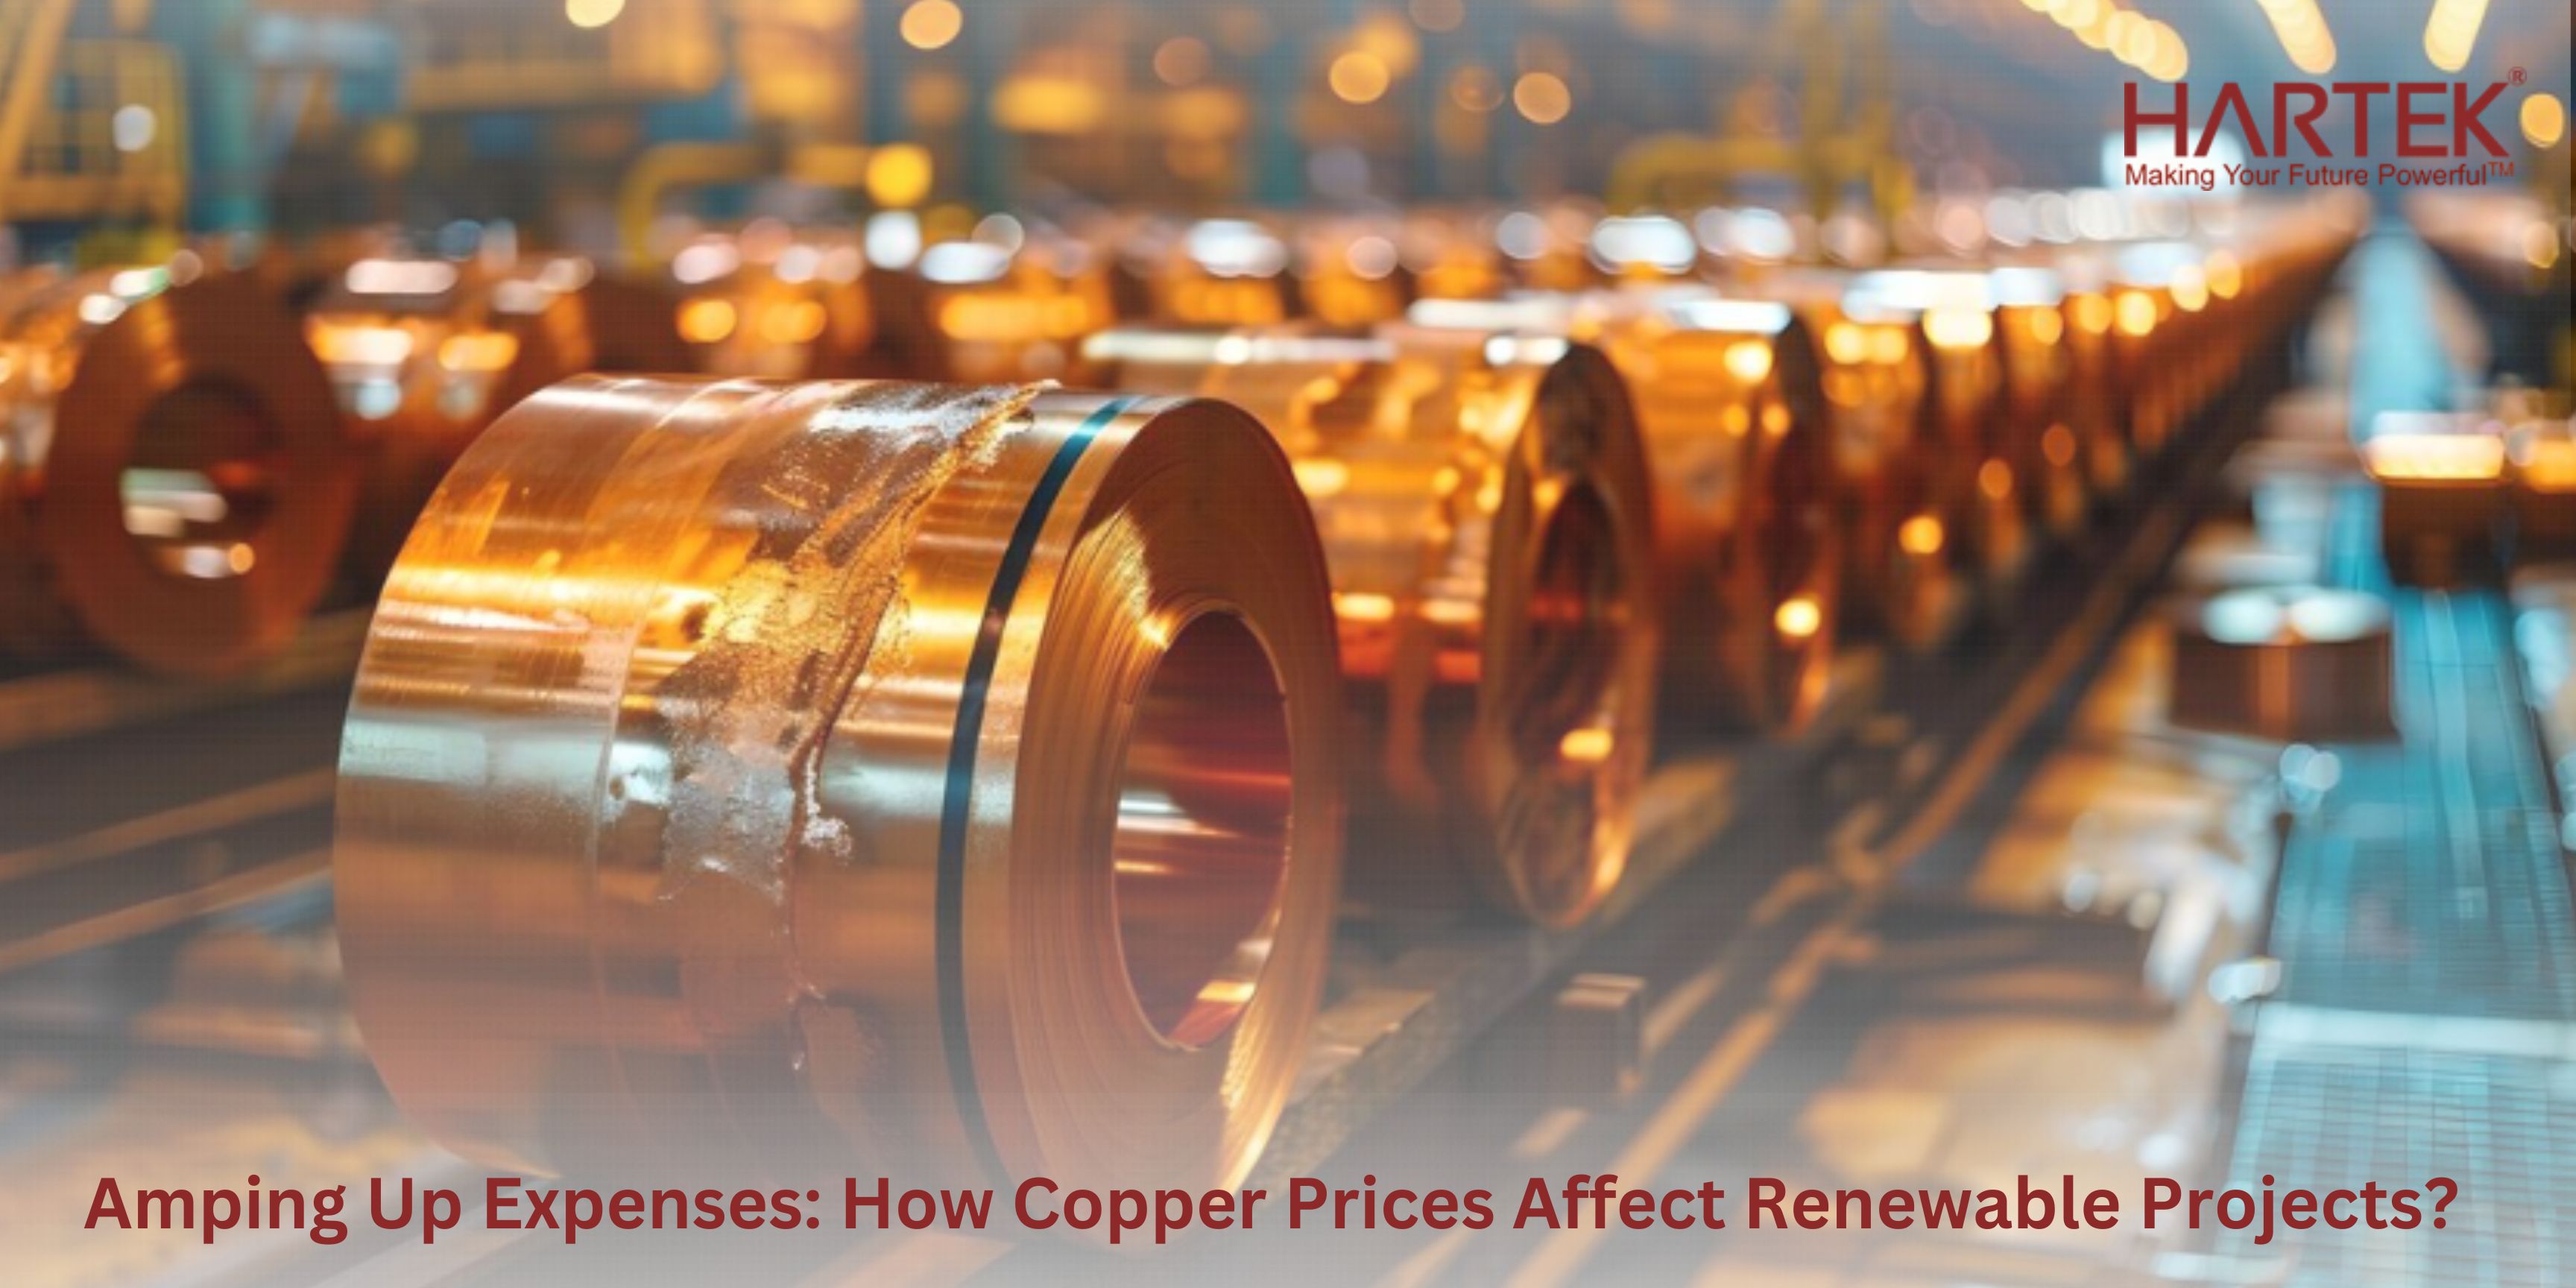 How are fluctuating Copper Prices Impact EPC Projects in the Energy Sector?